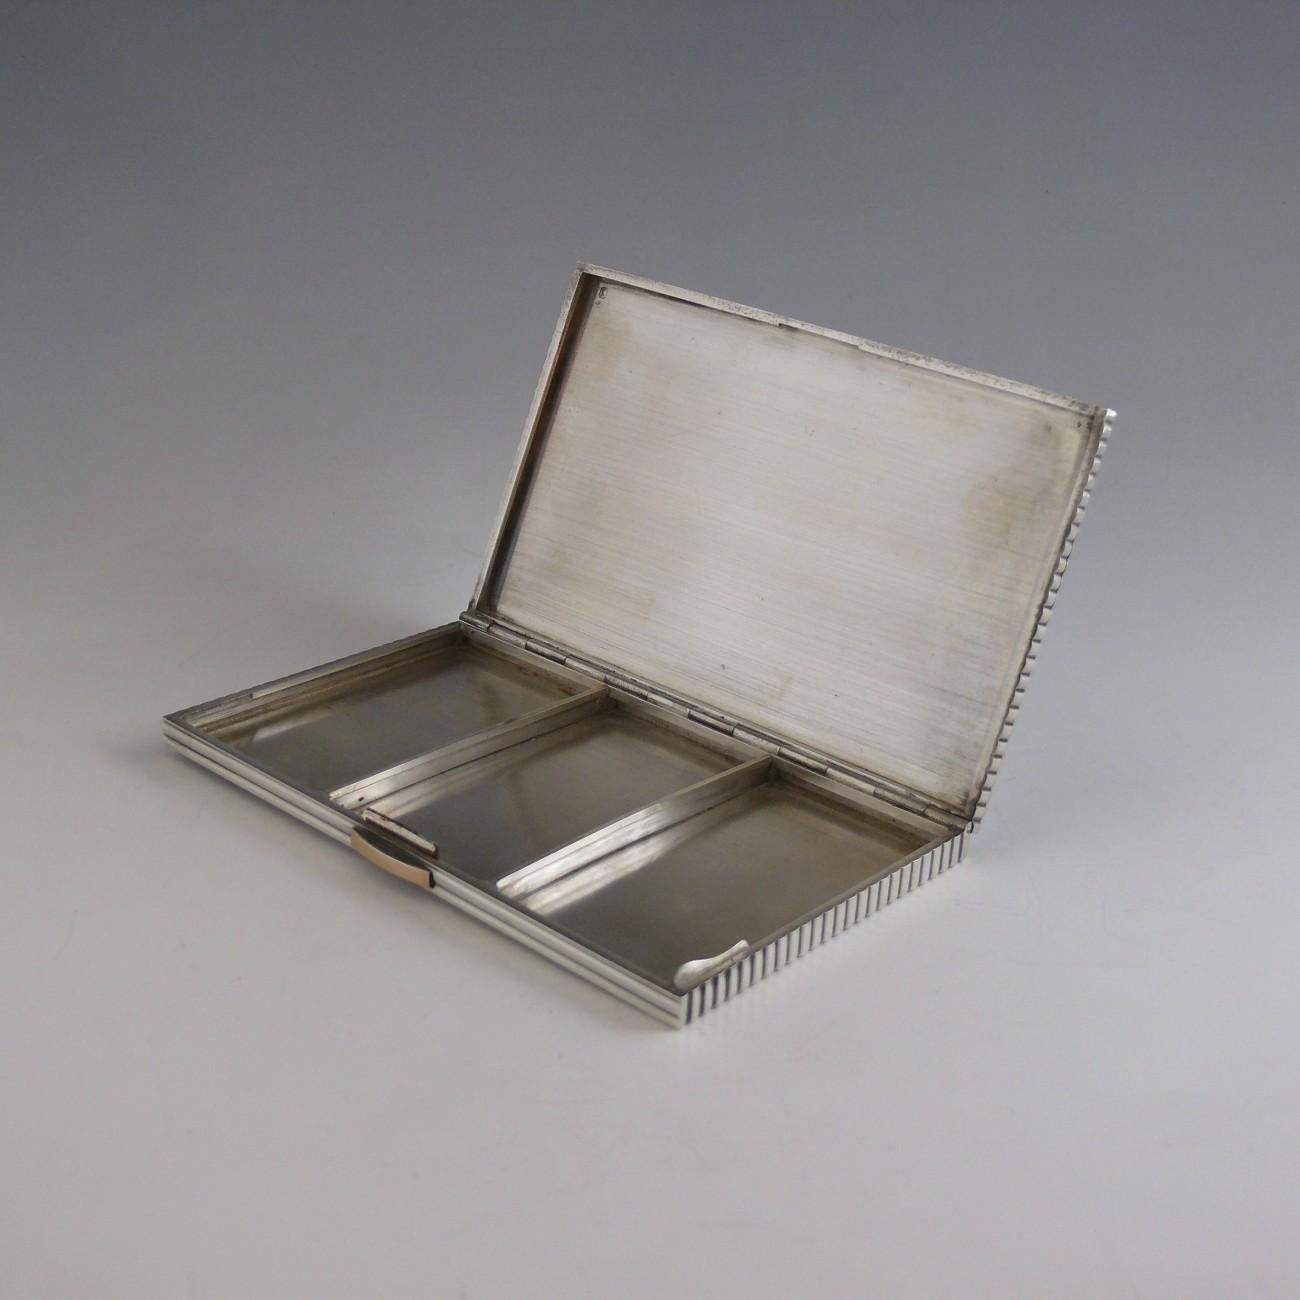 A stylish Art Deco fluted continental silver cigarette case with gold push button catch, circa 1920.

Dimensions: 13 cm/5 inches (length) x 8 cm/3 inches (width) x 0.5 cm/¼ inches (height)

Bentleys are Members of LAPADA, the London and Provincial